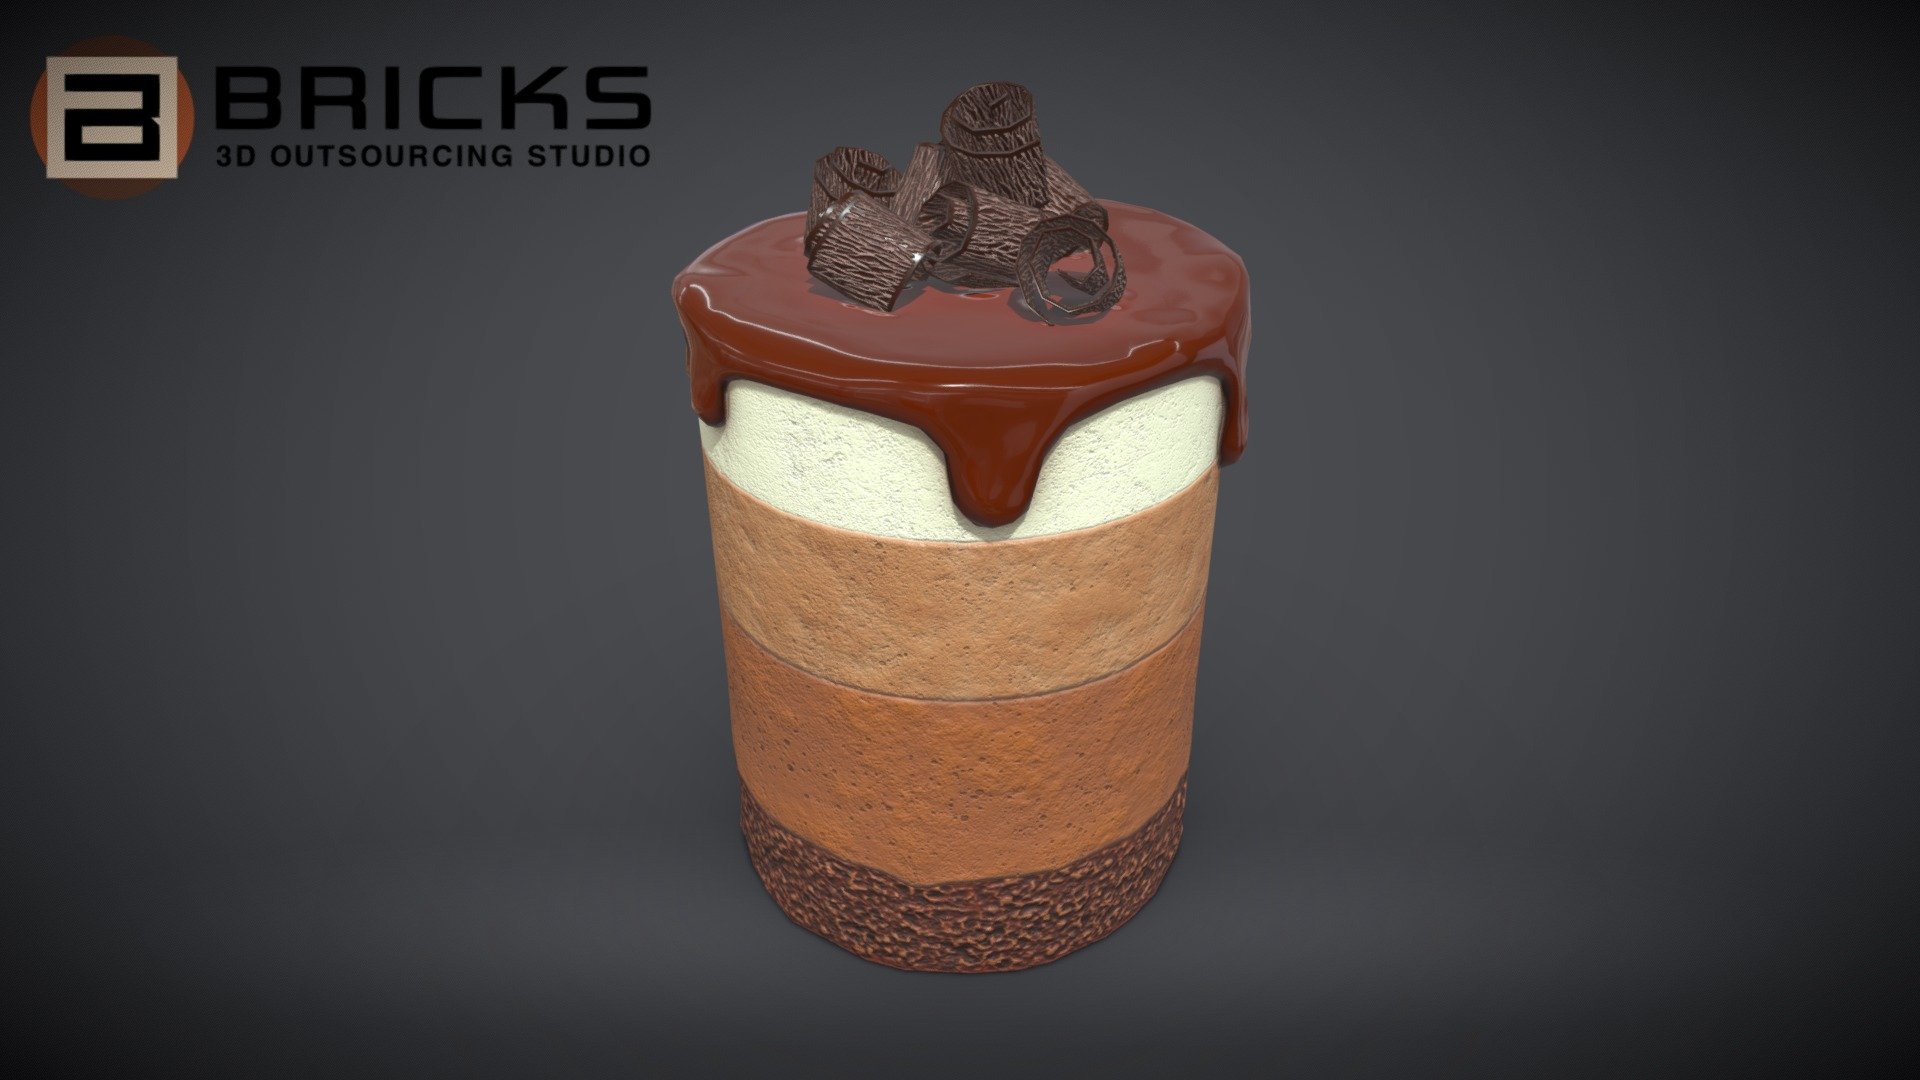 PBR Food Asset:
ChocolateMousseCake
Polycount: 1982
Vertex count: 1009
Texture Size: 2048px x 2048px
Normal: OpenGL

If you need any adjust in file please contact us: team@bricks3dstudio.com

Hire us: tringuyen@bricks3dstudio.com
Here is us: https://www.bricks3dstudio.com/
        https://www.artstation.com/bricksstudio
        https://www.facebook.com/Bricks3dstudio/
        https://www.linkedin.com/in/bricks-studio-b10462252/ - ChocolateMousseCake - Buy Royalty Free 3D model by Bricks Studio (@bricks3dstudio) 3d model